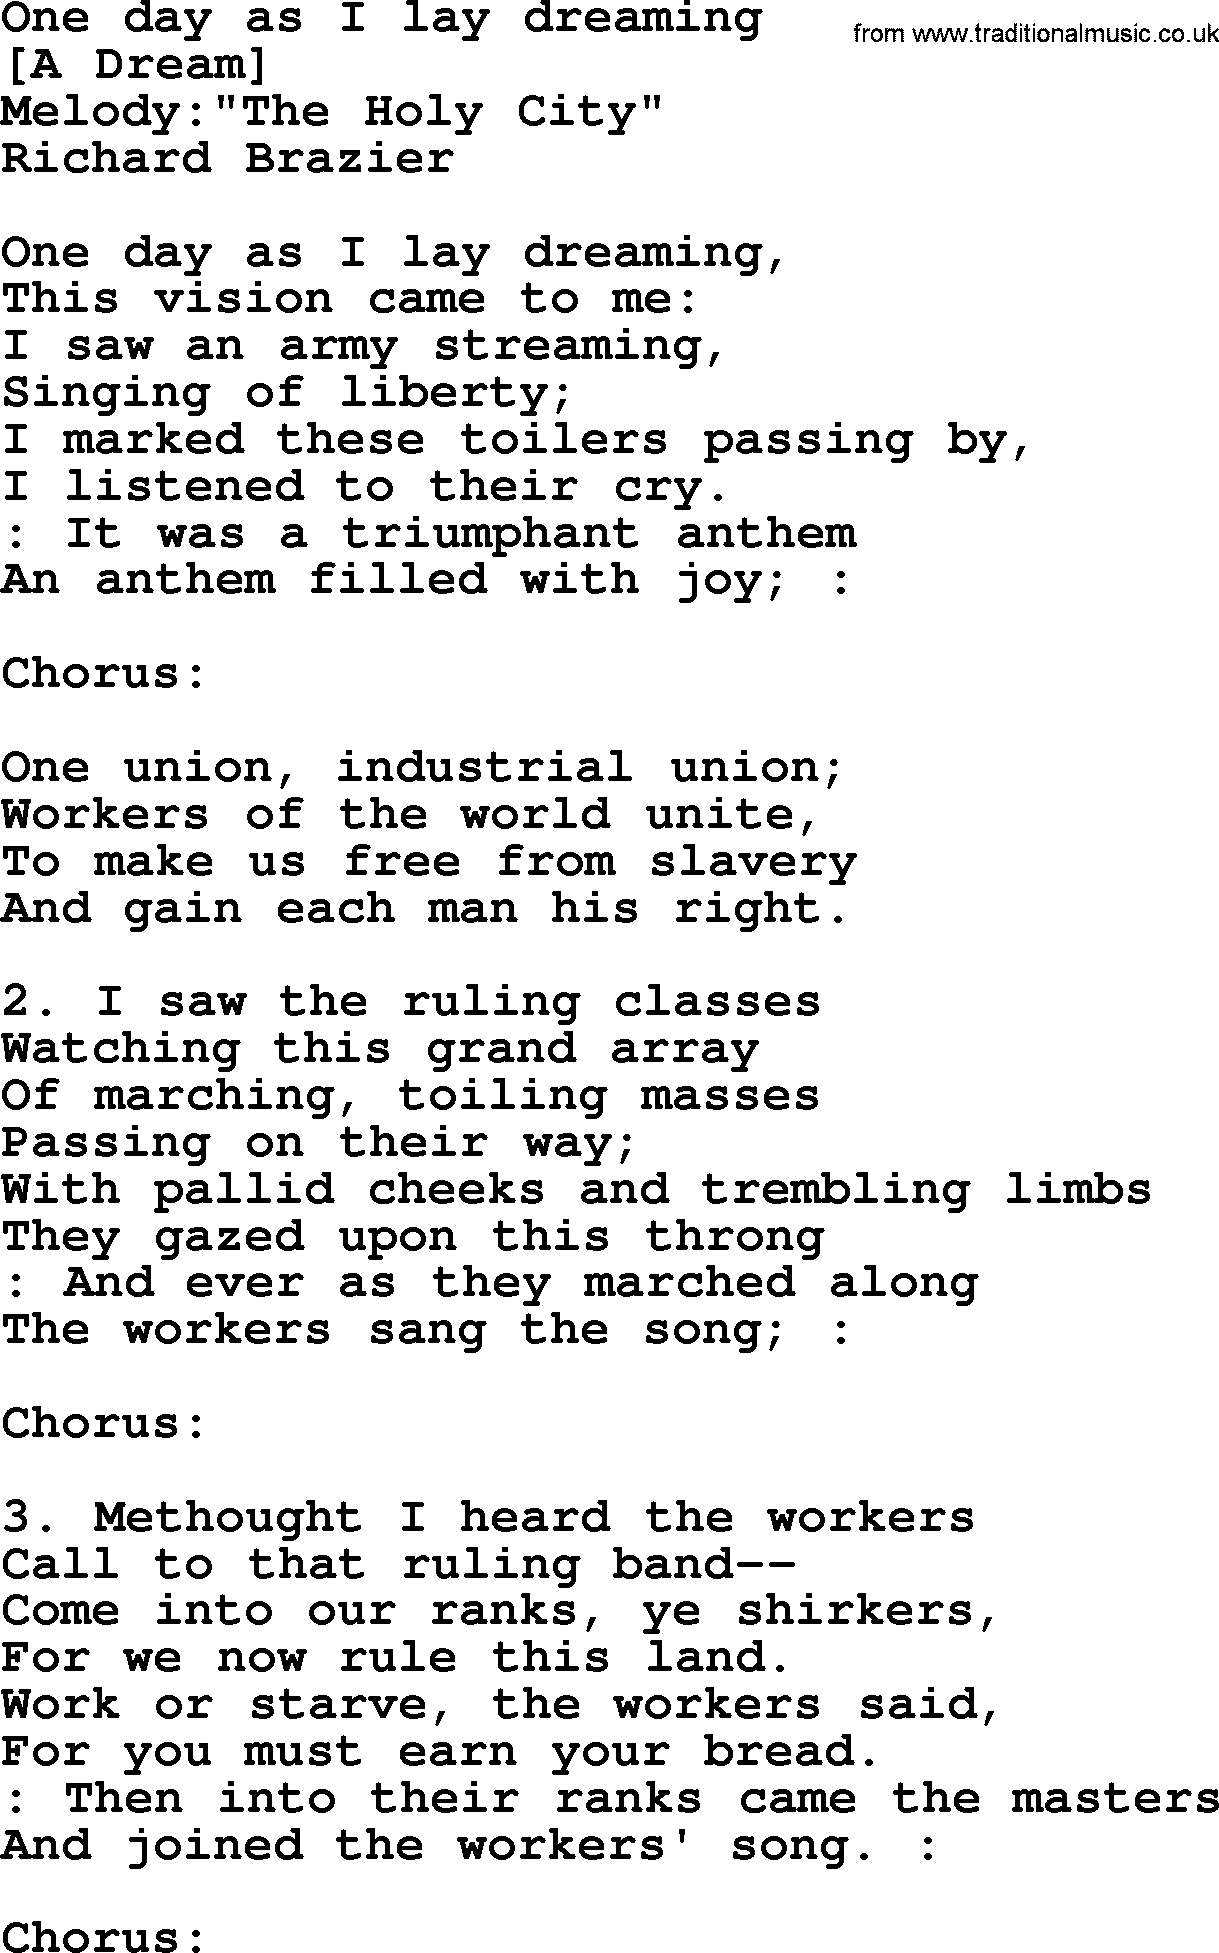 Old American Song: One Day As I Lay Dreaming, lyrics